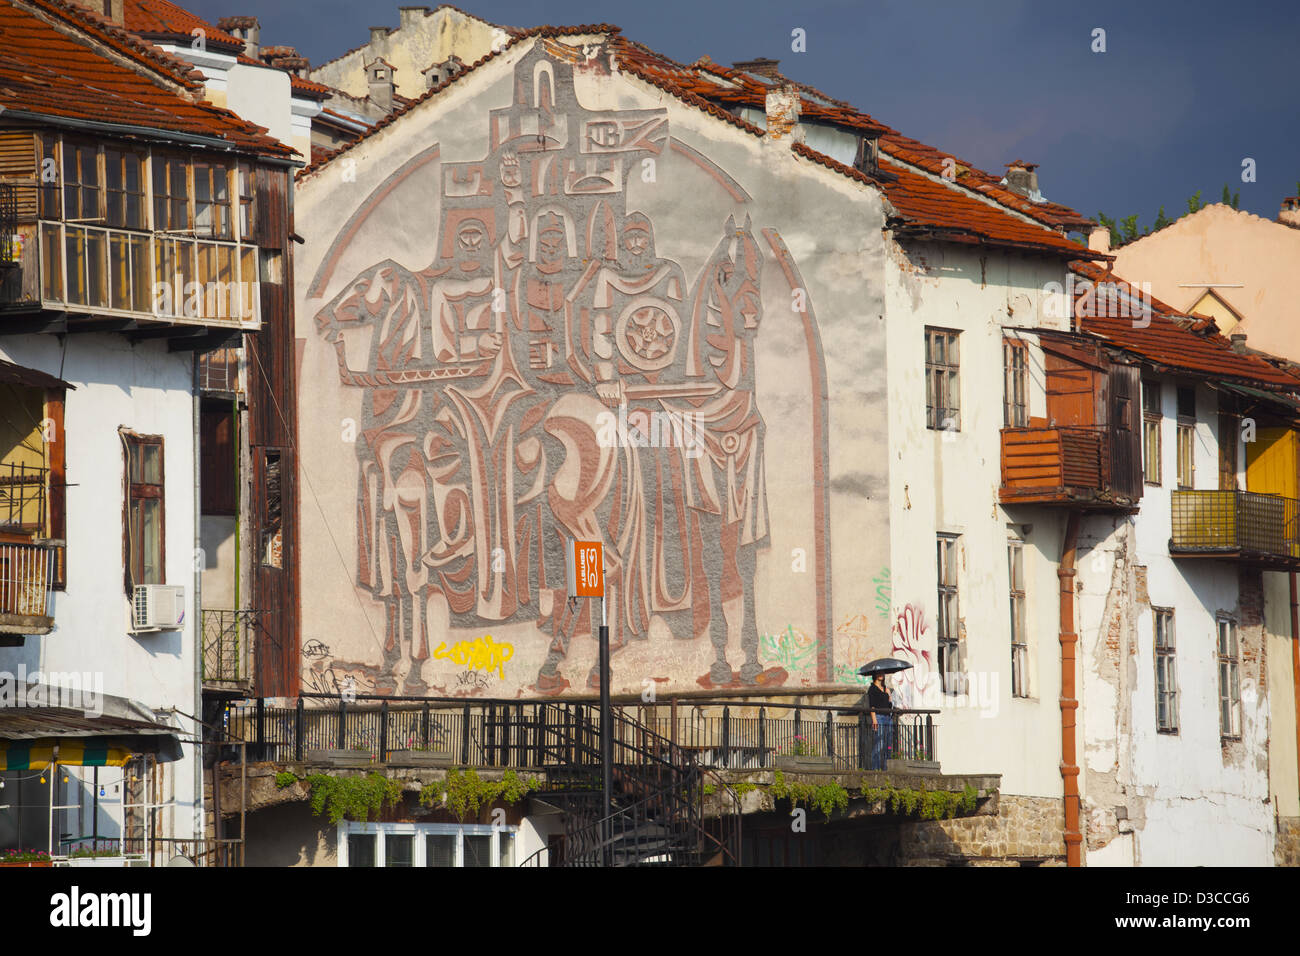 Bulgaria, Europe, Veliko Tarnovo, Houses, Plaster Artwork Decorating A Building Wall To Commemorate An Historical Event. Stock Photo